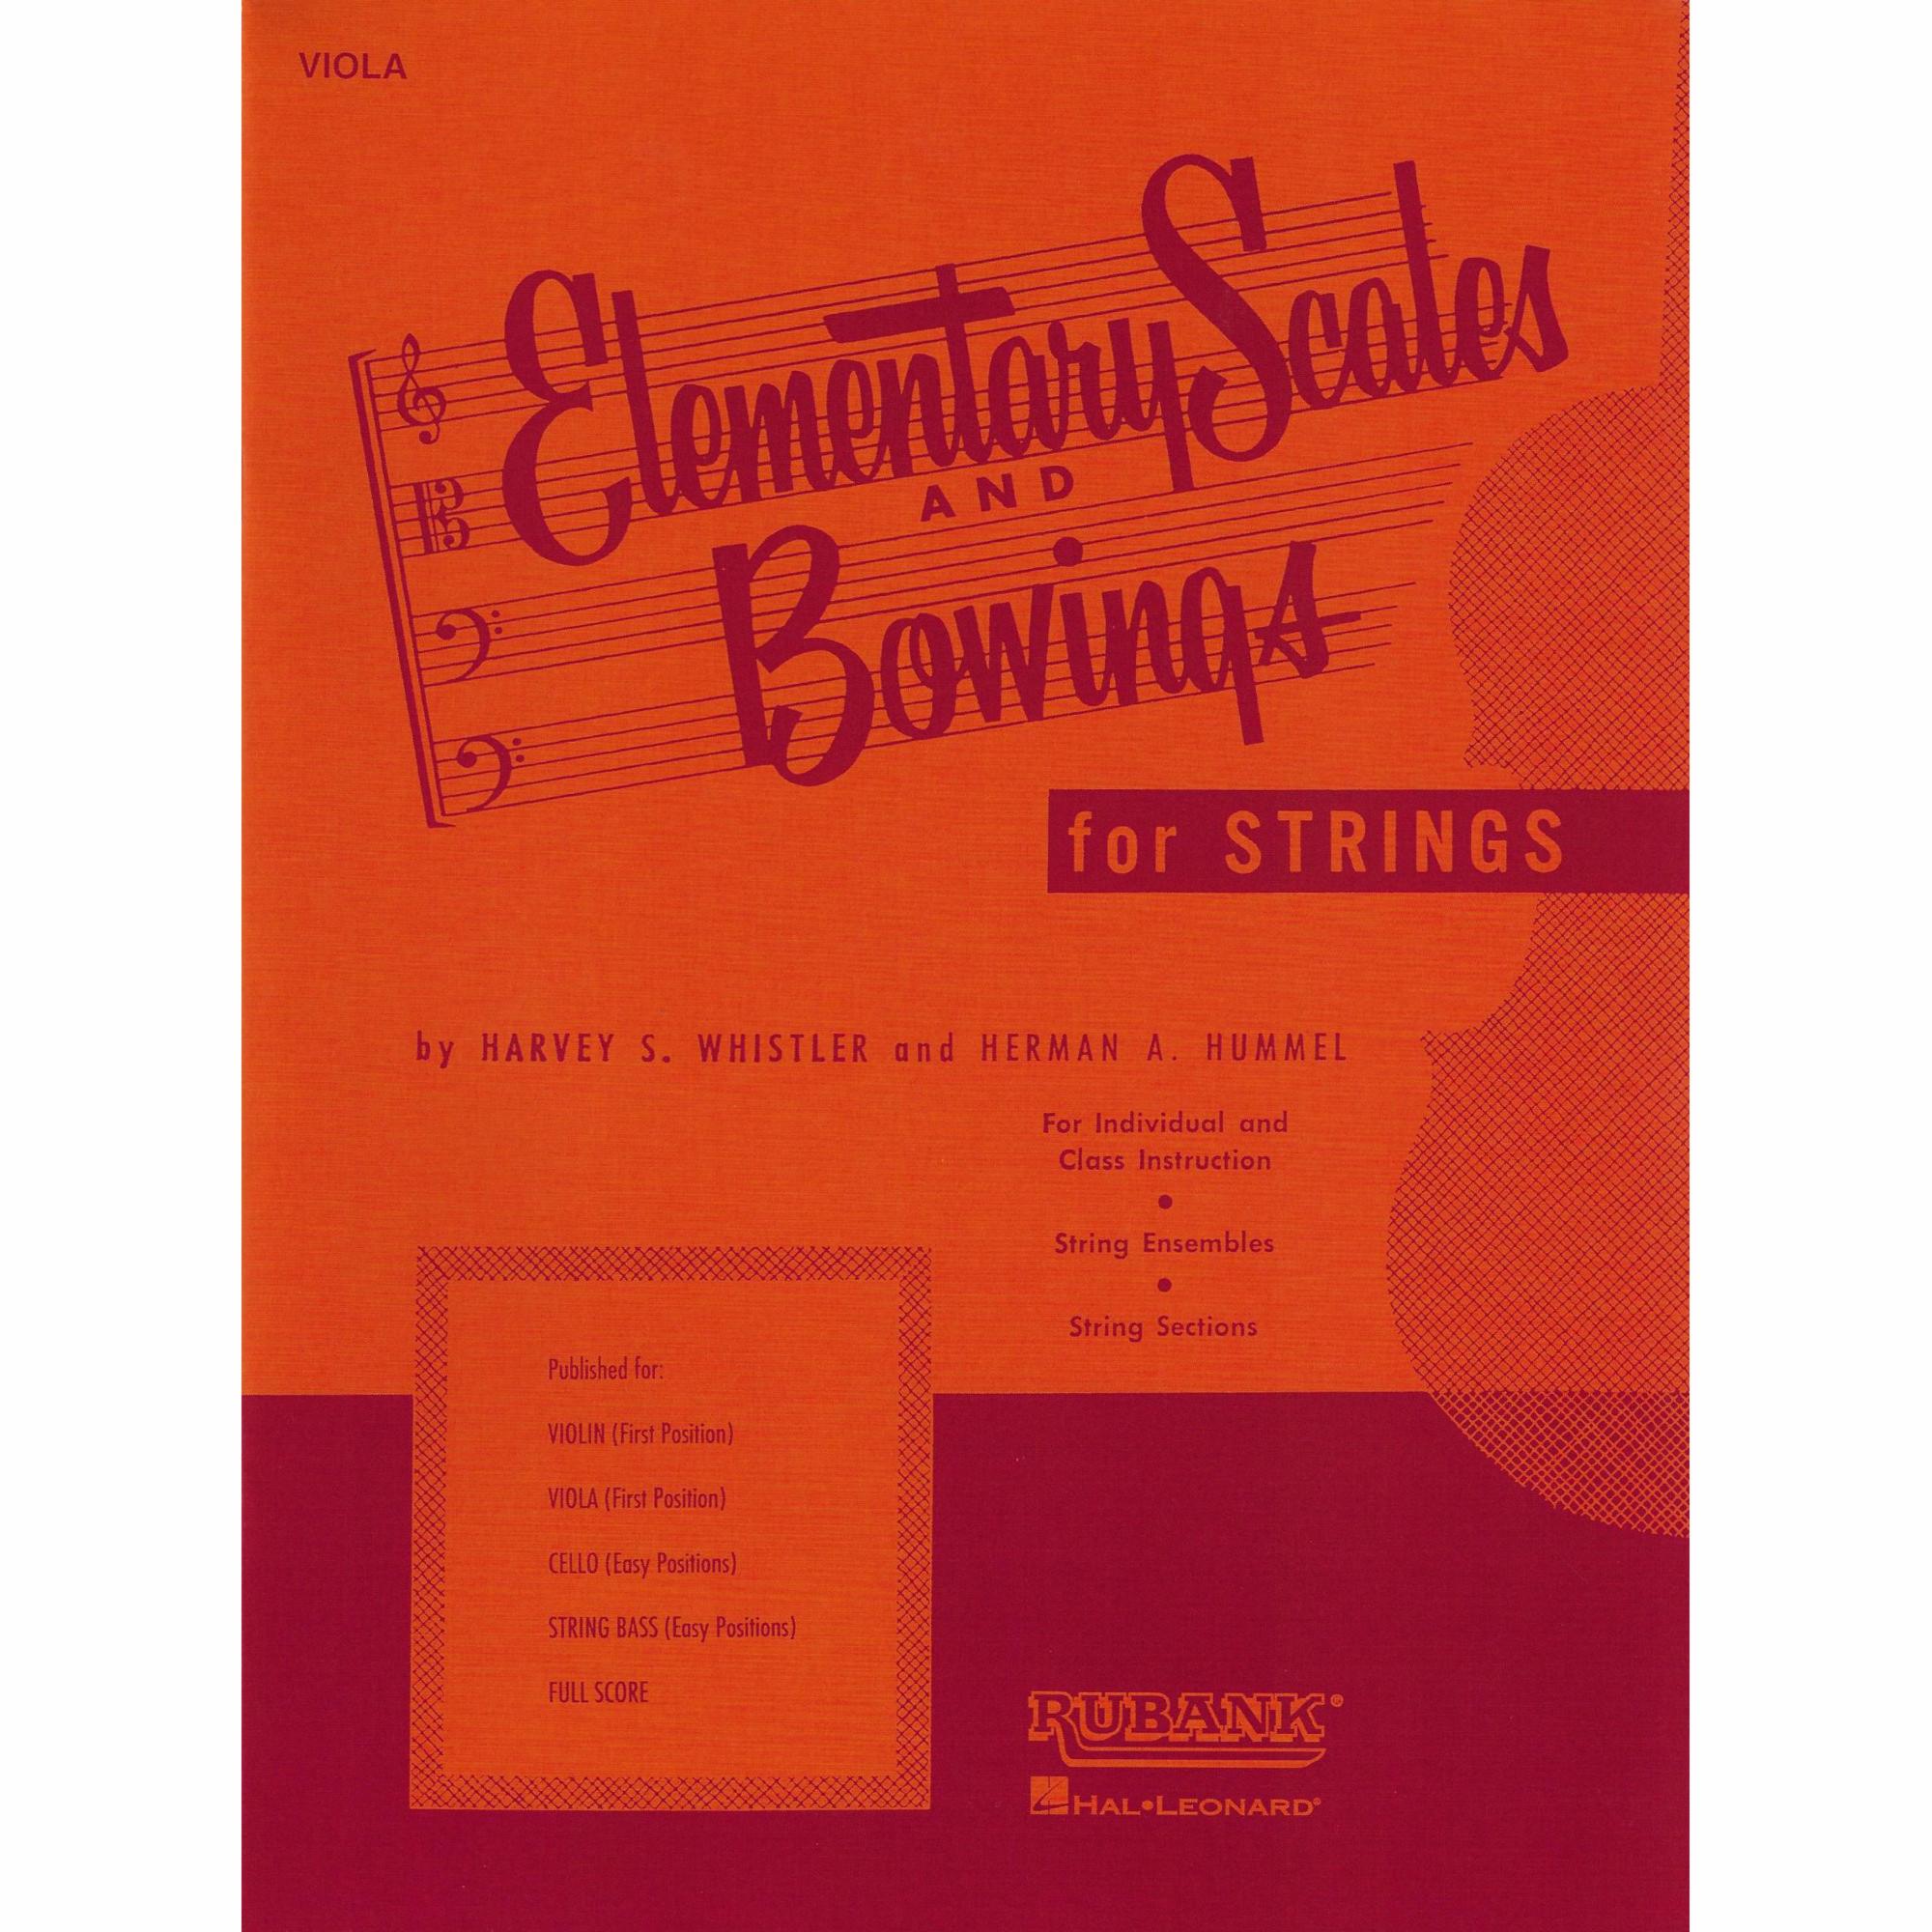 Elementary Scales and Bowings for Viola